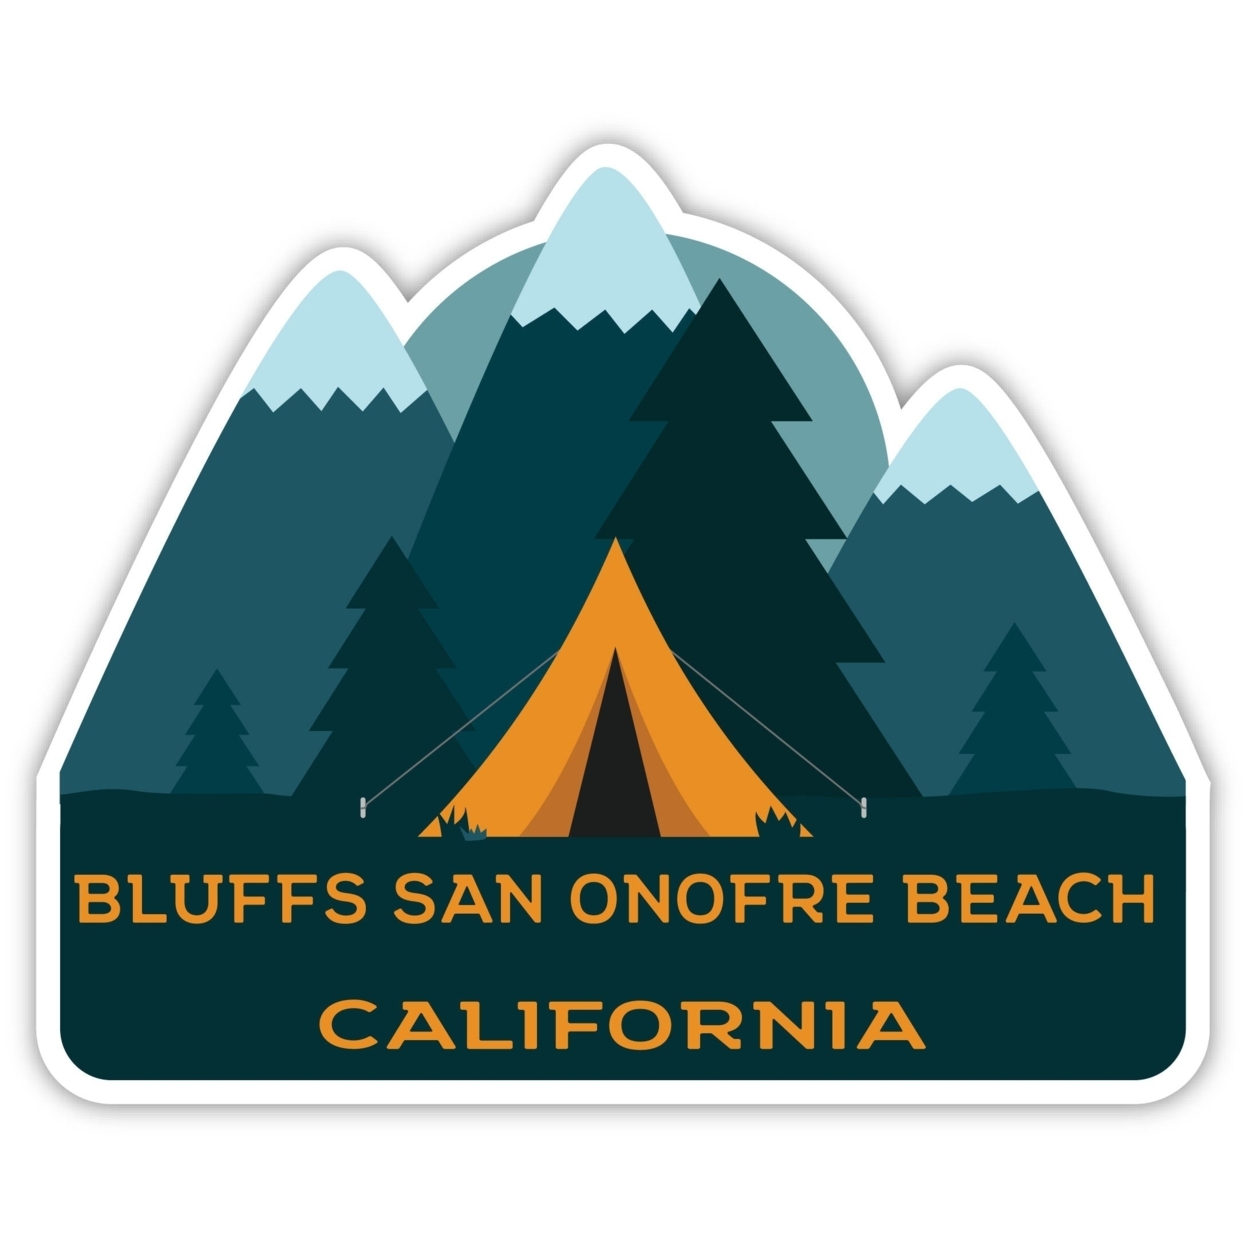 Bluffs San Onofre Beach California Souvenir Decorative Stickers (Choose Theme And Size) - 4-Pack, 6-Inch, Camp Life